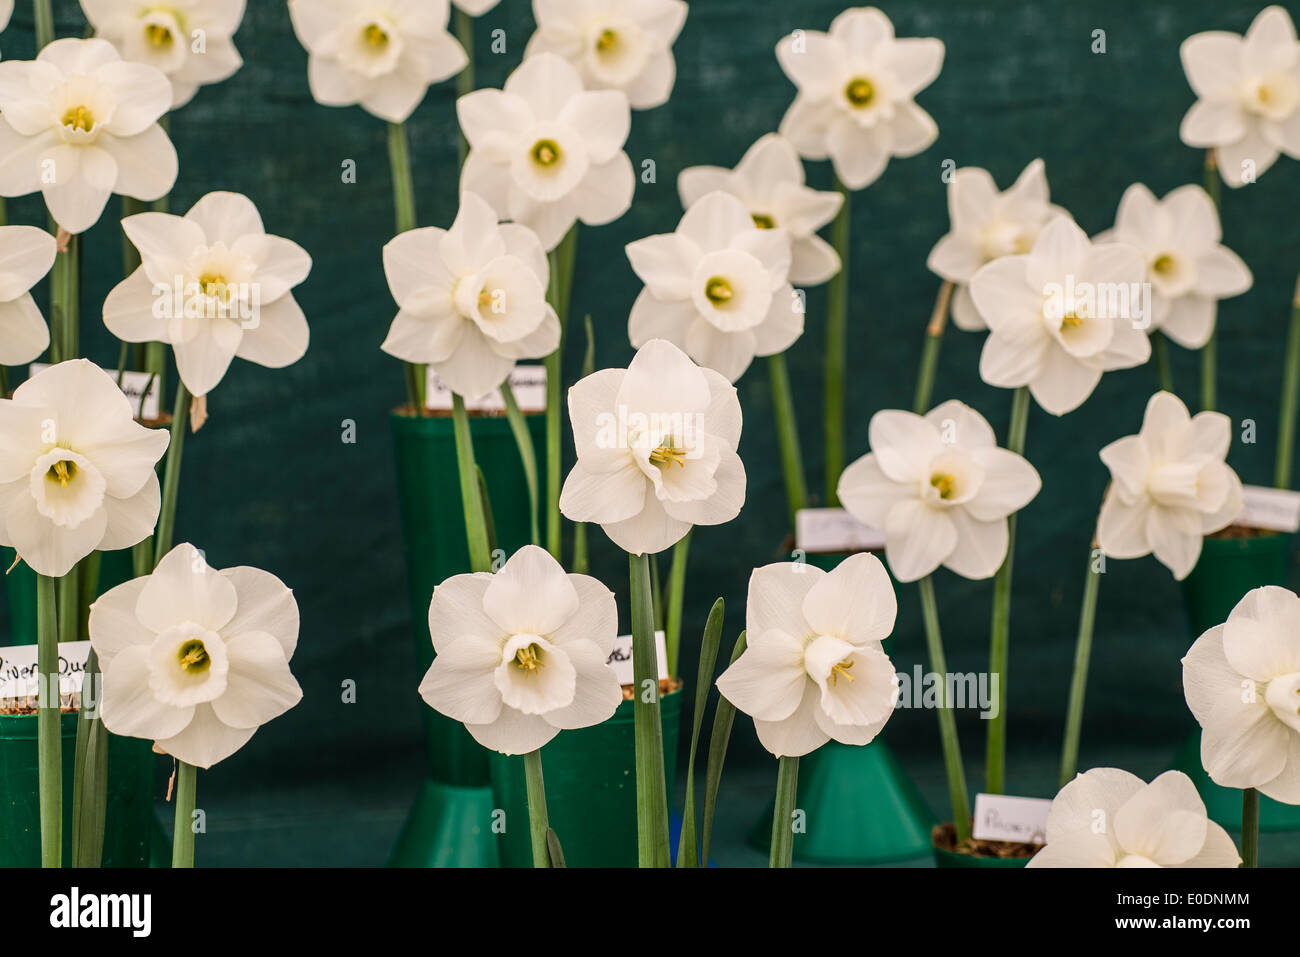 Display of various white, pale cream daffodils Stock Photo